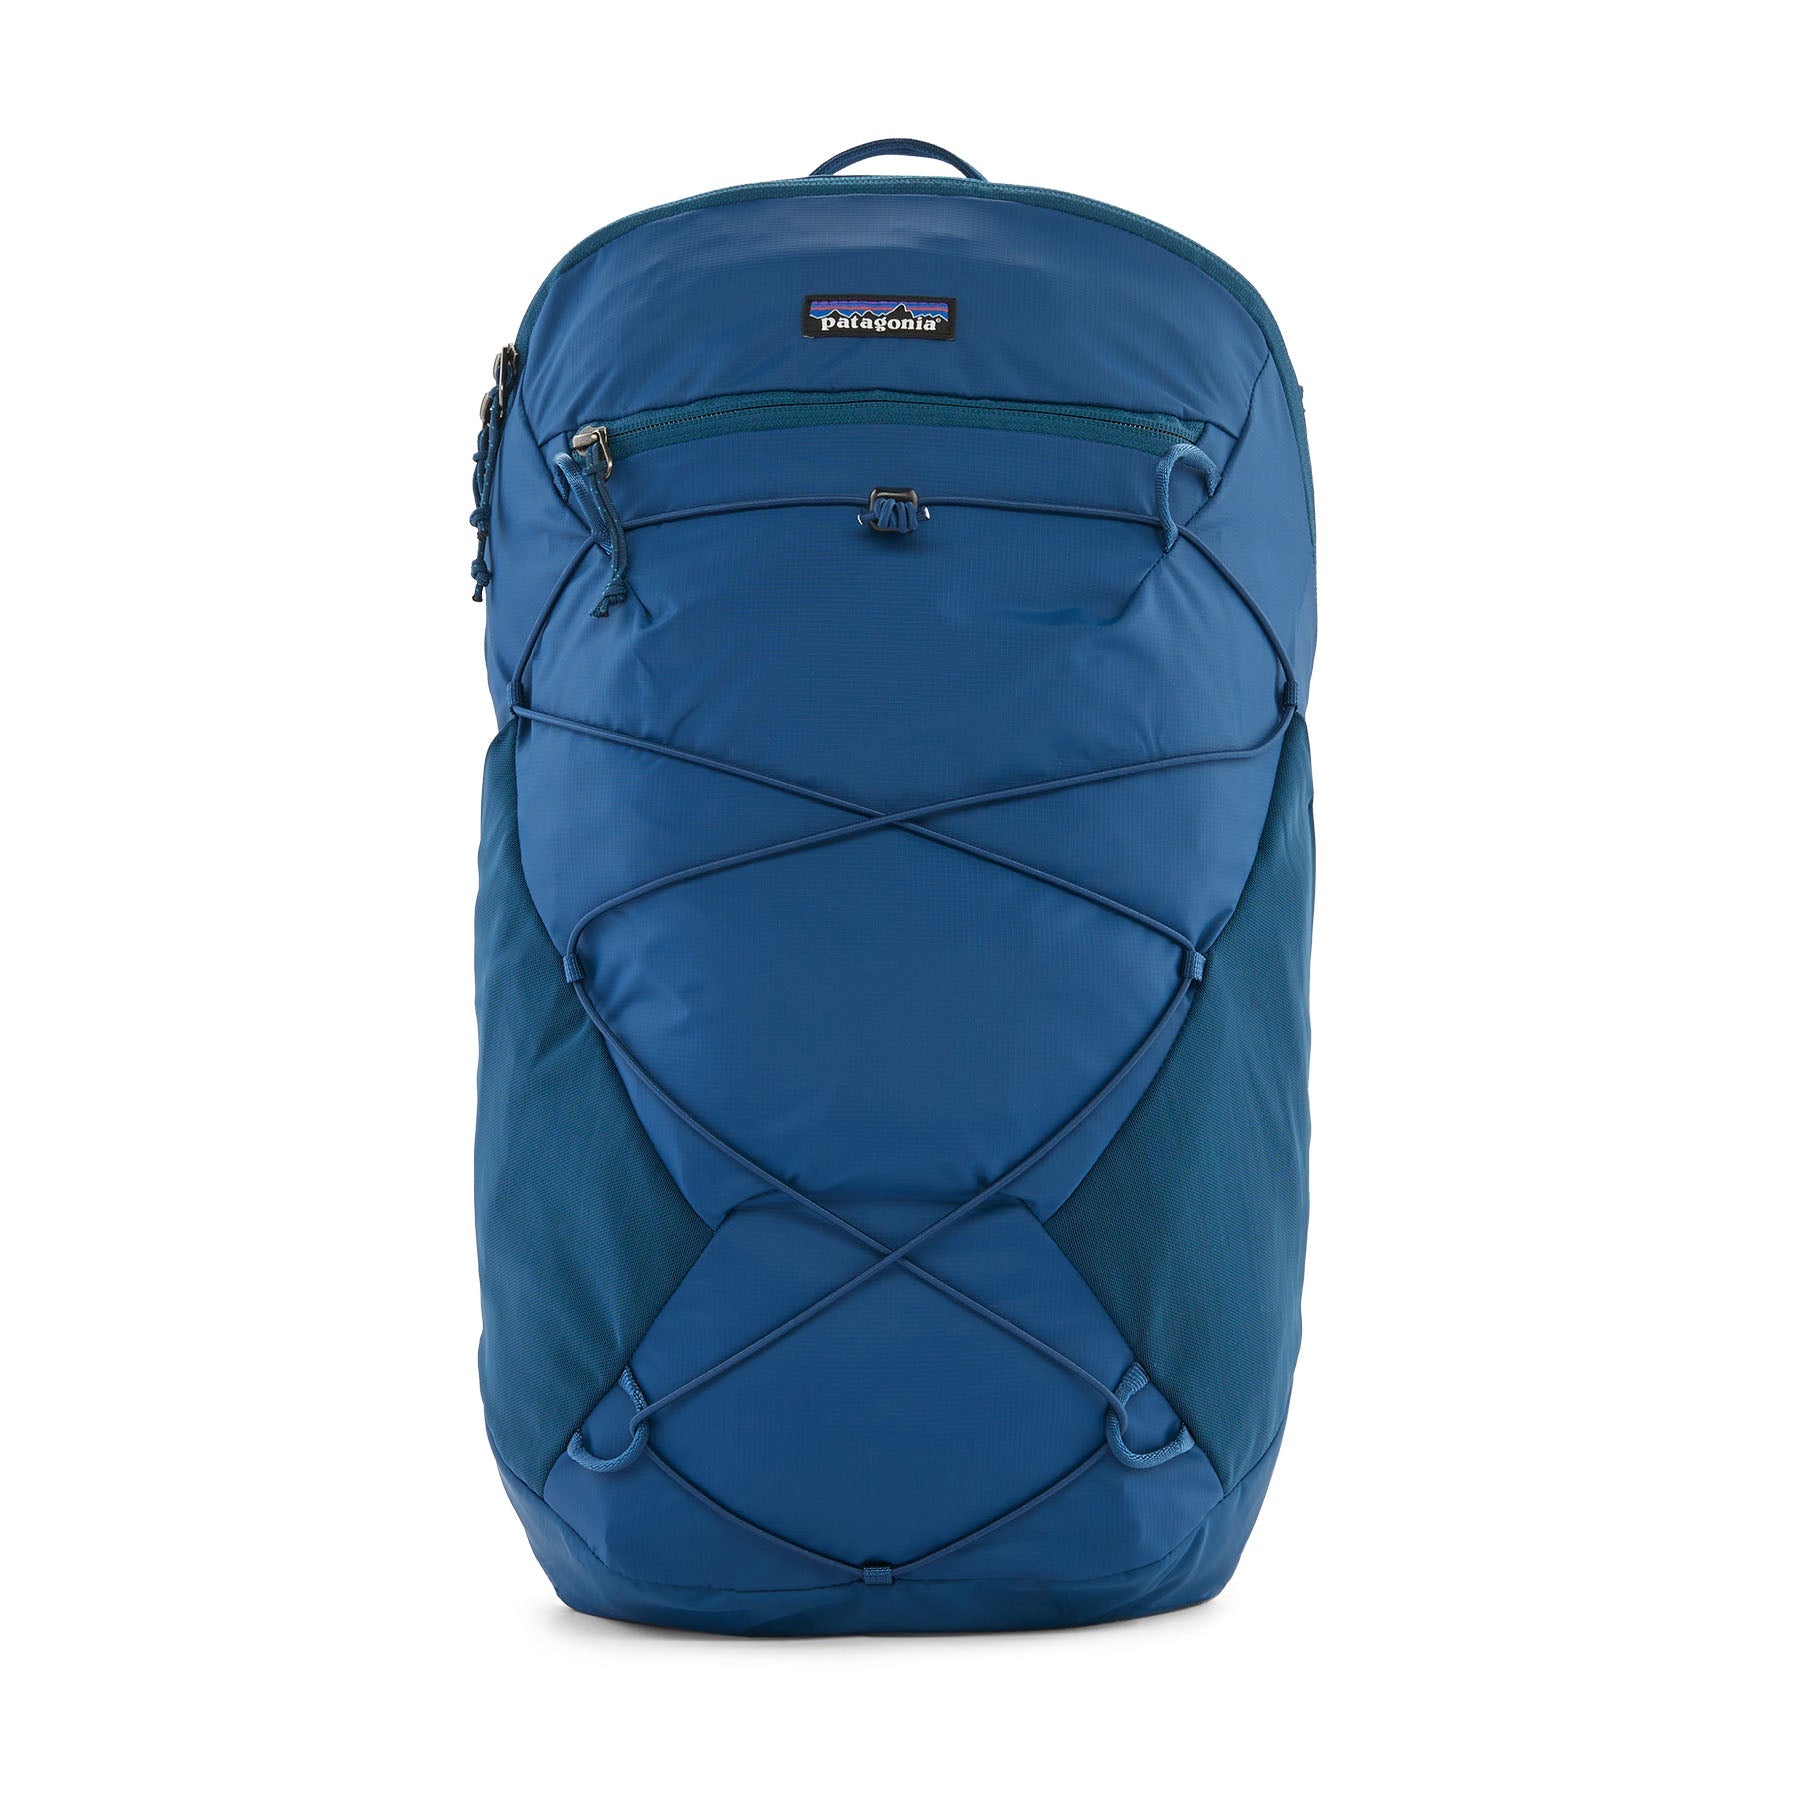 Technical Packs & Backpacks by Patagonia